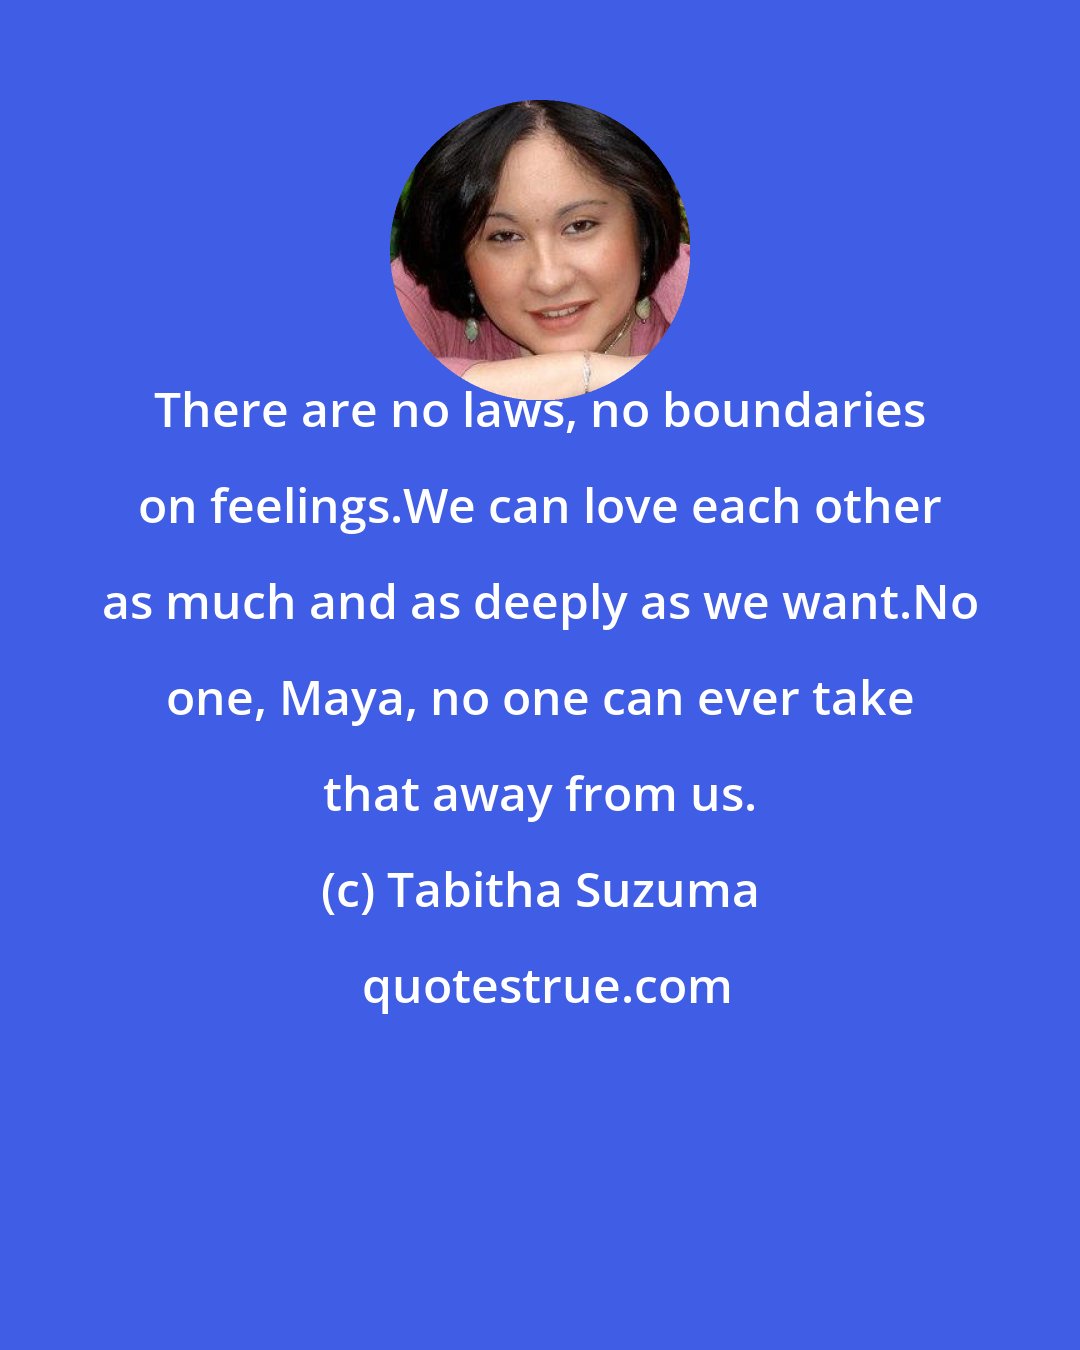 Tabitha Suzuma: There are no laws, no boundaries on feelings.We can love each other as much and as deeply as we want.No one, Maya, no one can ever take that away from us.